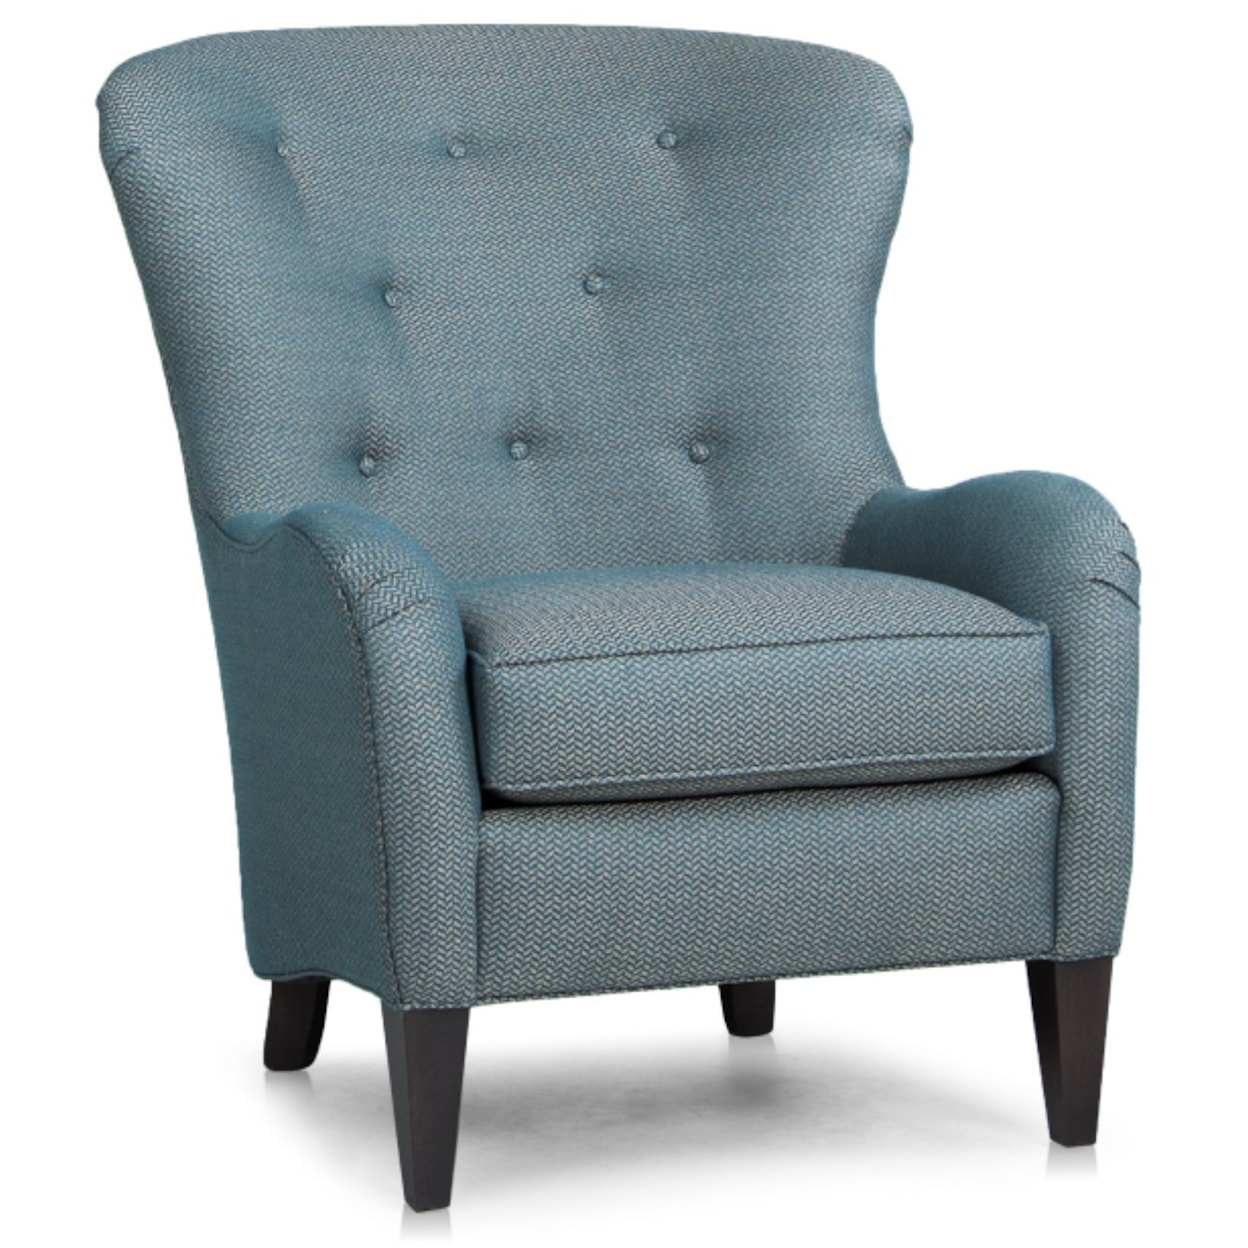 Smith Brothers 502 Chair